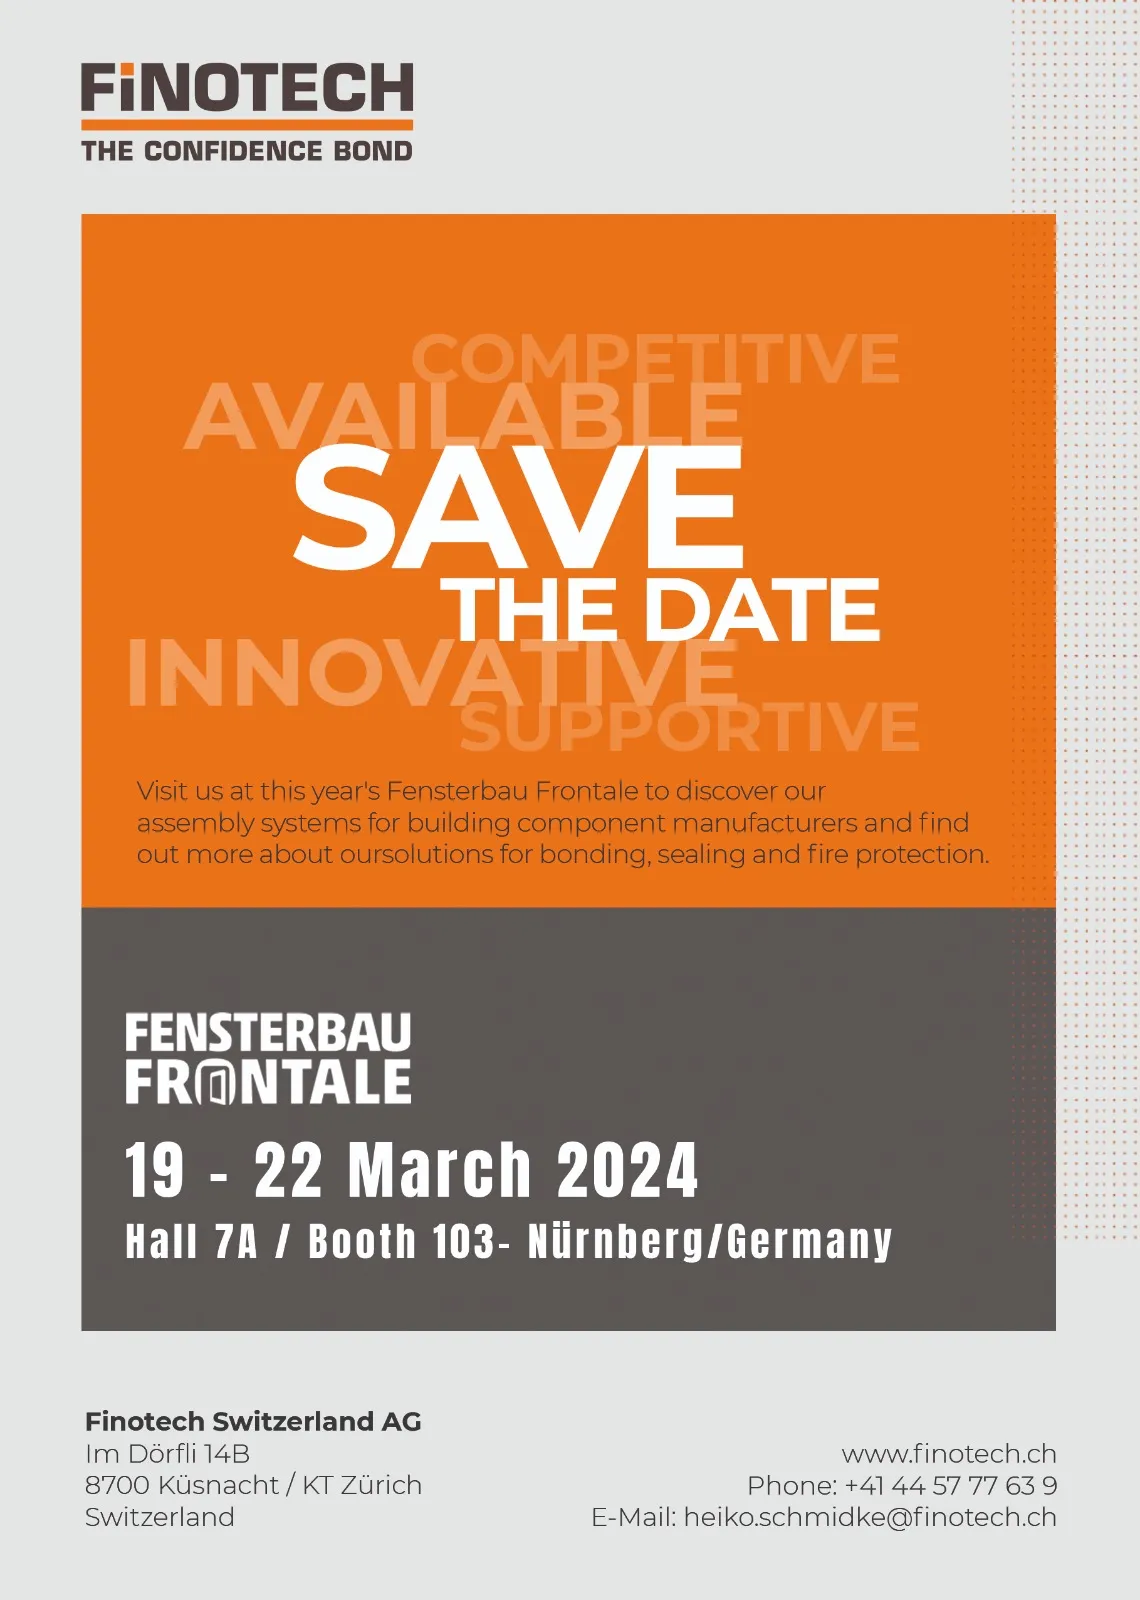 Save the date - Finotech Switzerland at Fensterbau Frontale 2024 - Nuremberg, Germany